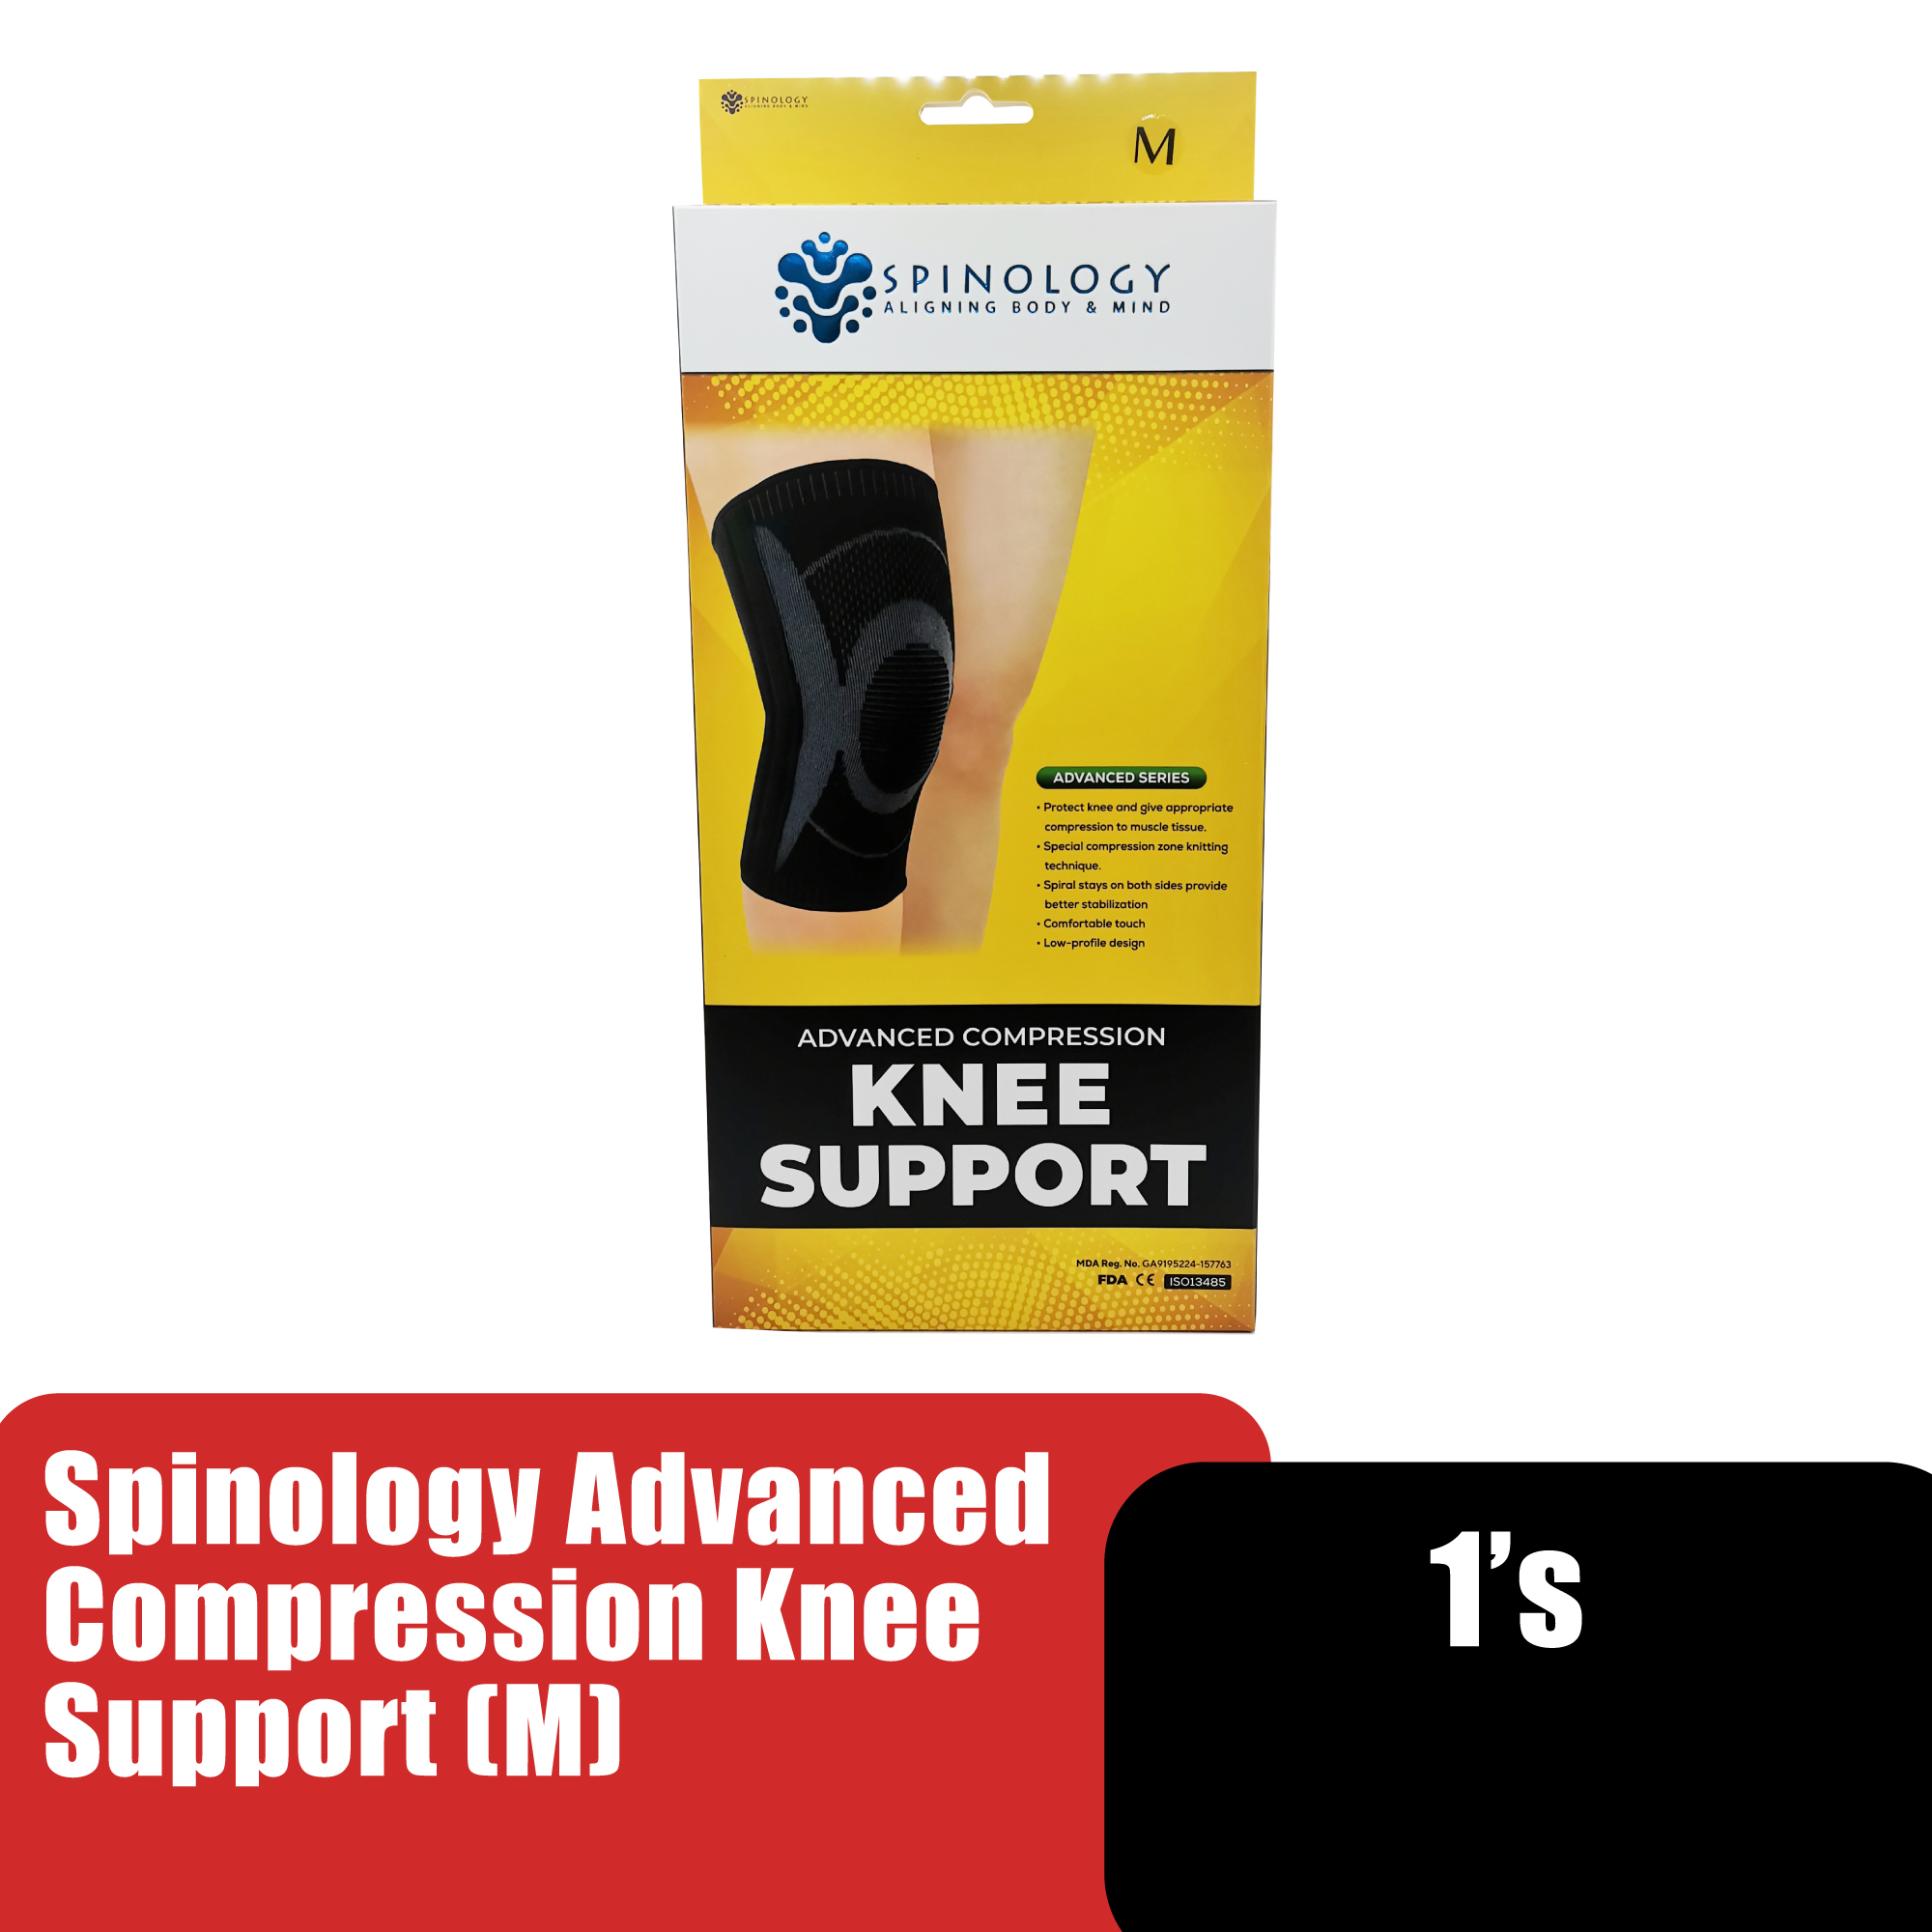 SPINOLOGY Advanced Compression Knee Guard Support Medical - M 护膝套 膝盖 保护套 Knee Support Knee Protector Lutut